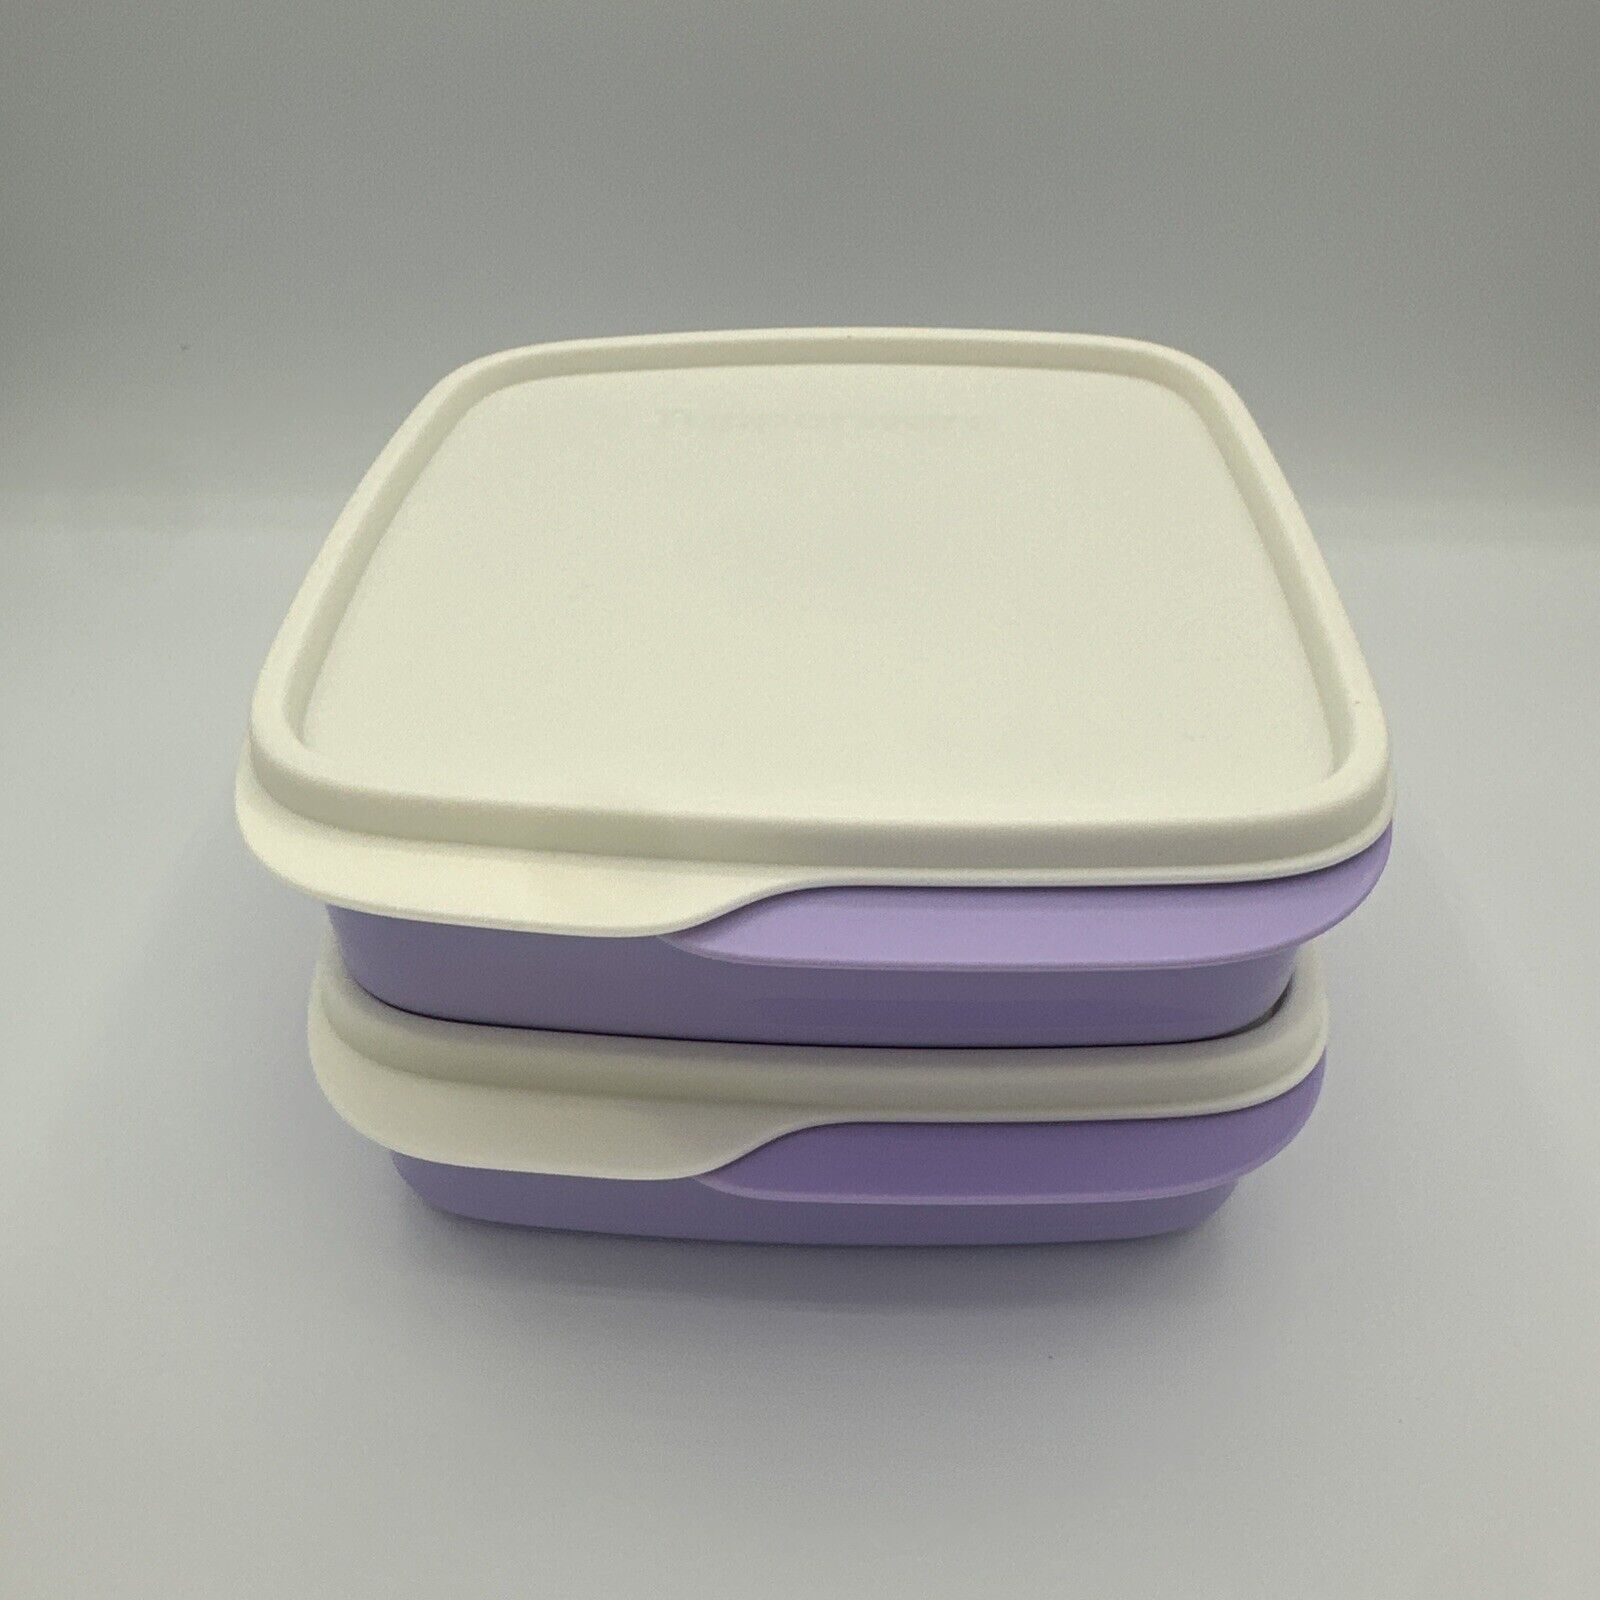 Tupperware Lunch-It Container Divided Set of 2 Lilac purple New